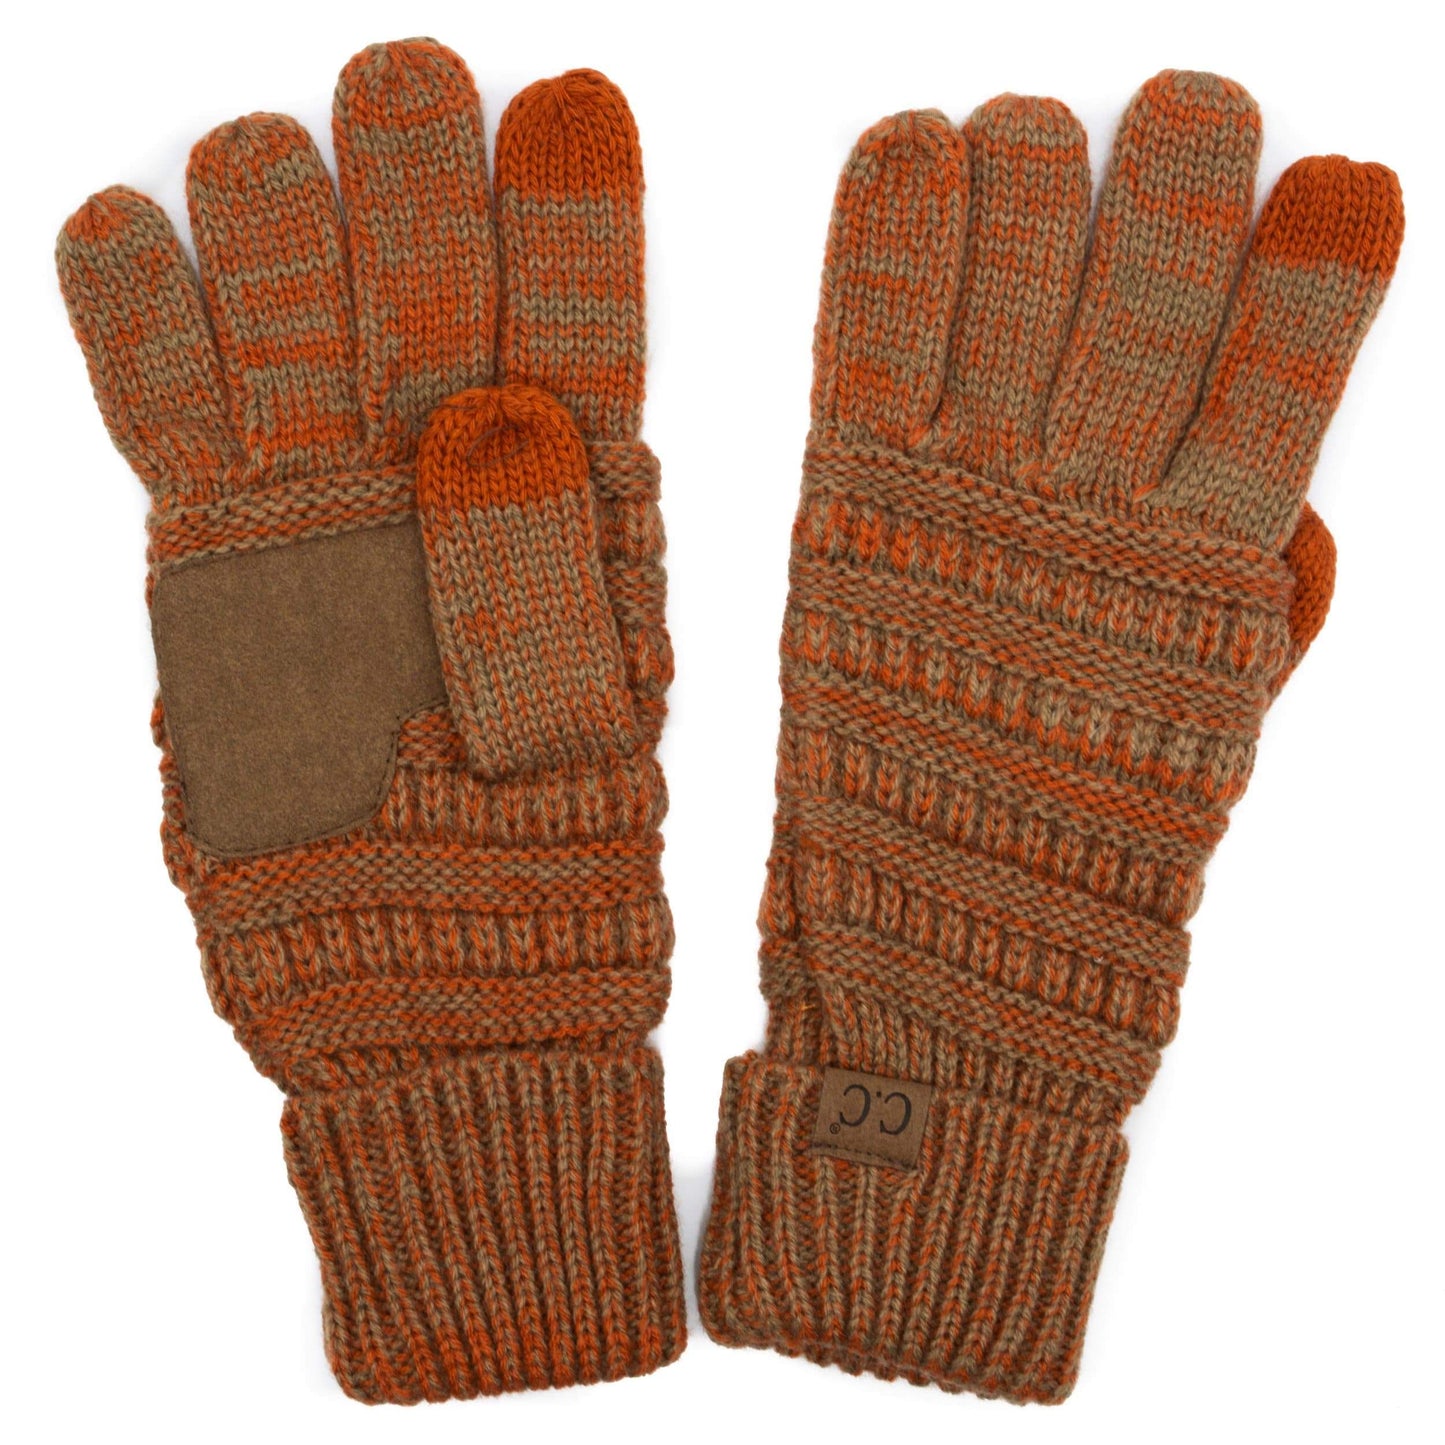 C.C Apparel Rust/Camel C.C Unisex Cable Knit Winter Warm Anti-Slip Two-Toned Touchscreen Texting Gloves